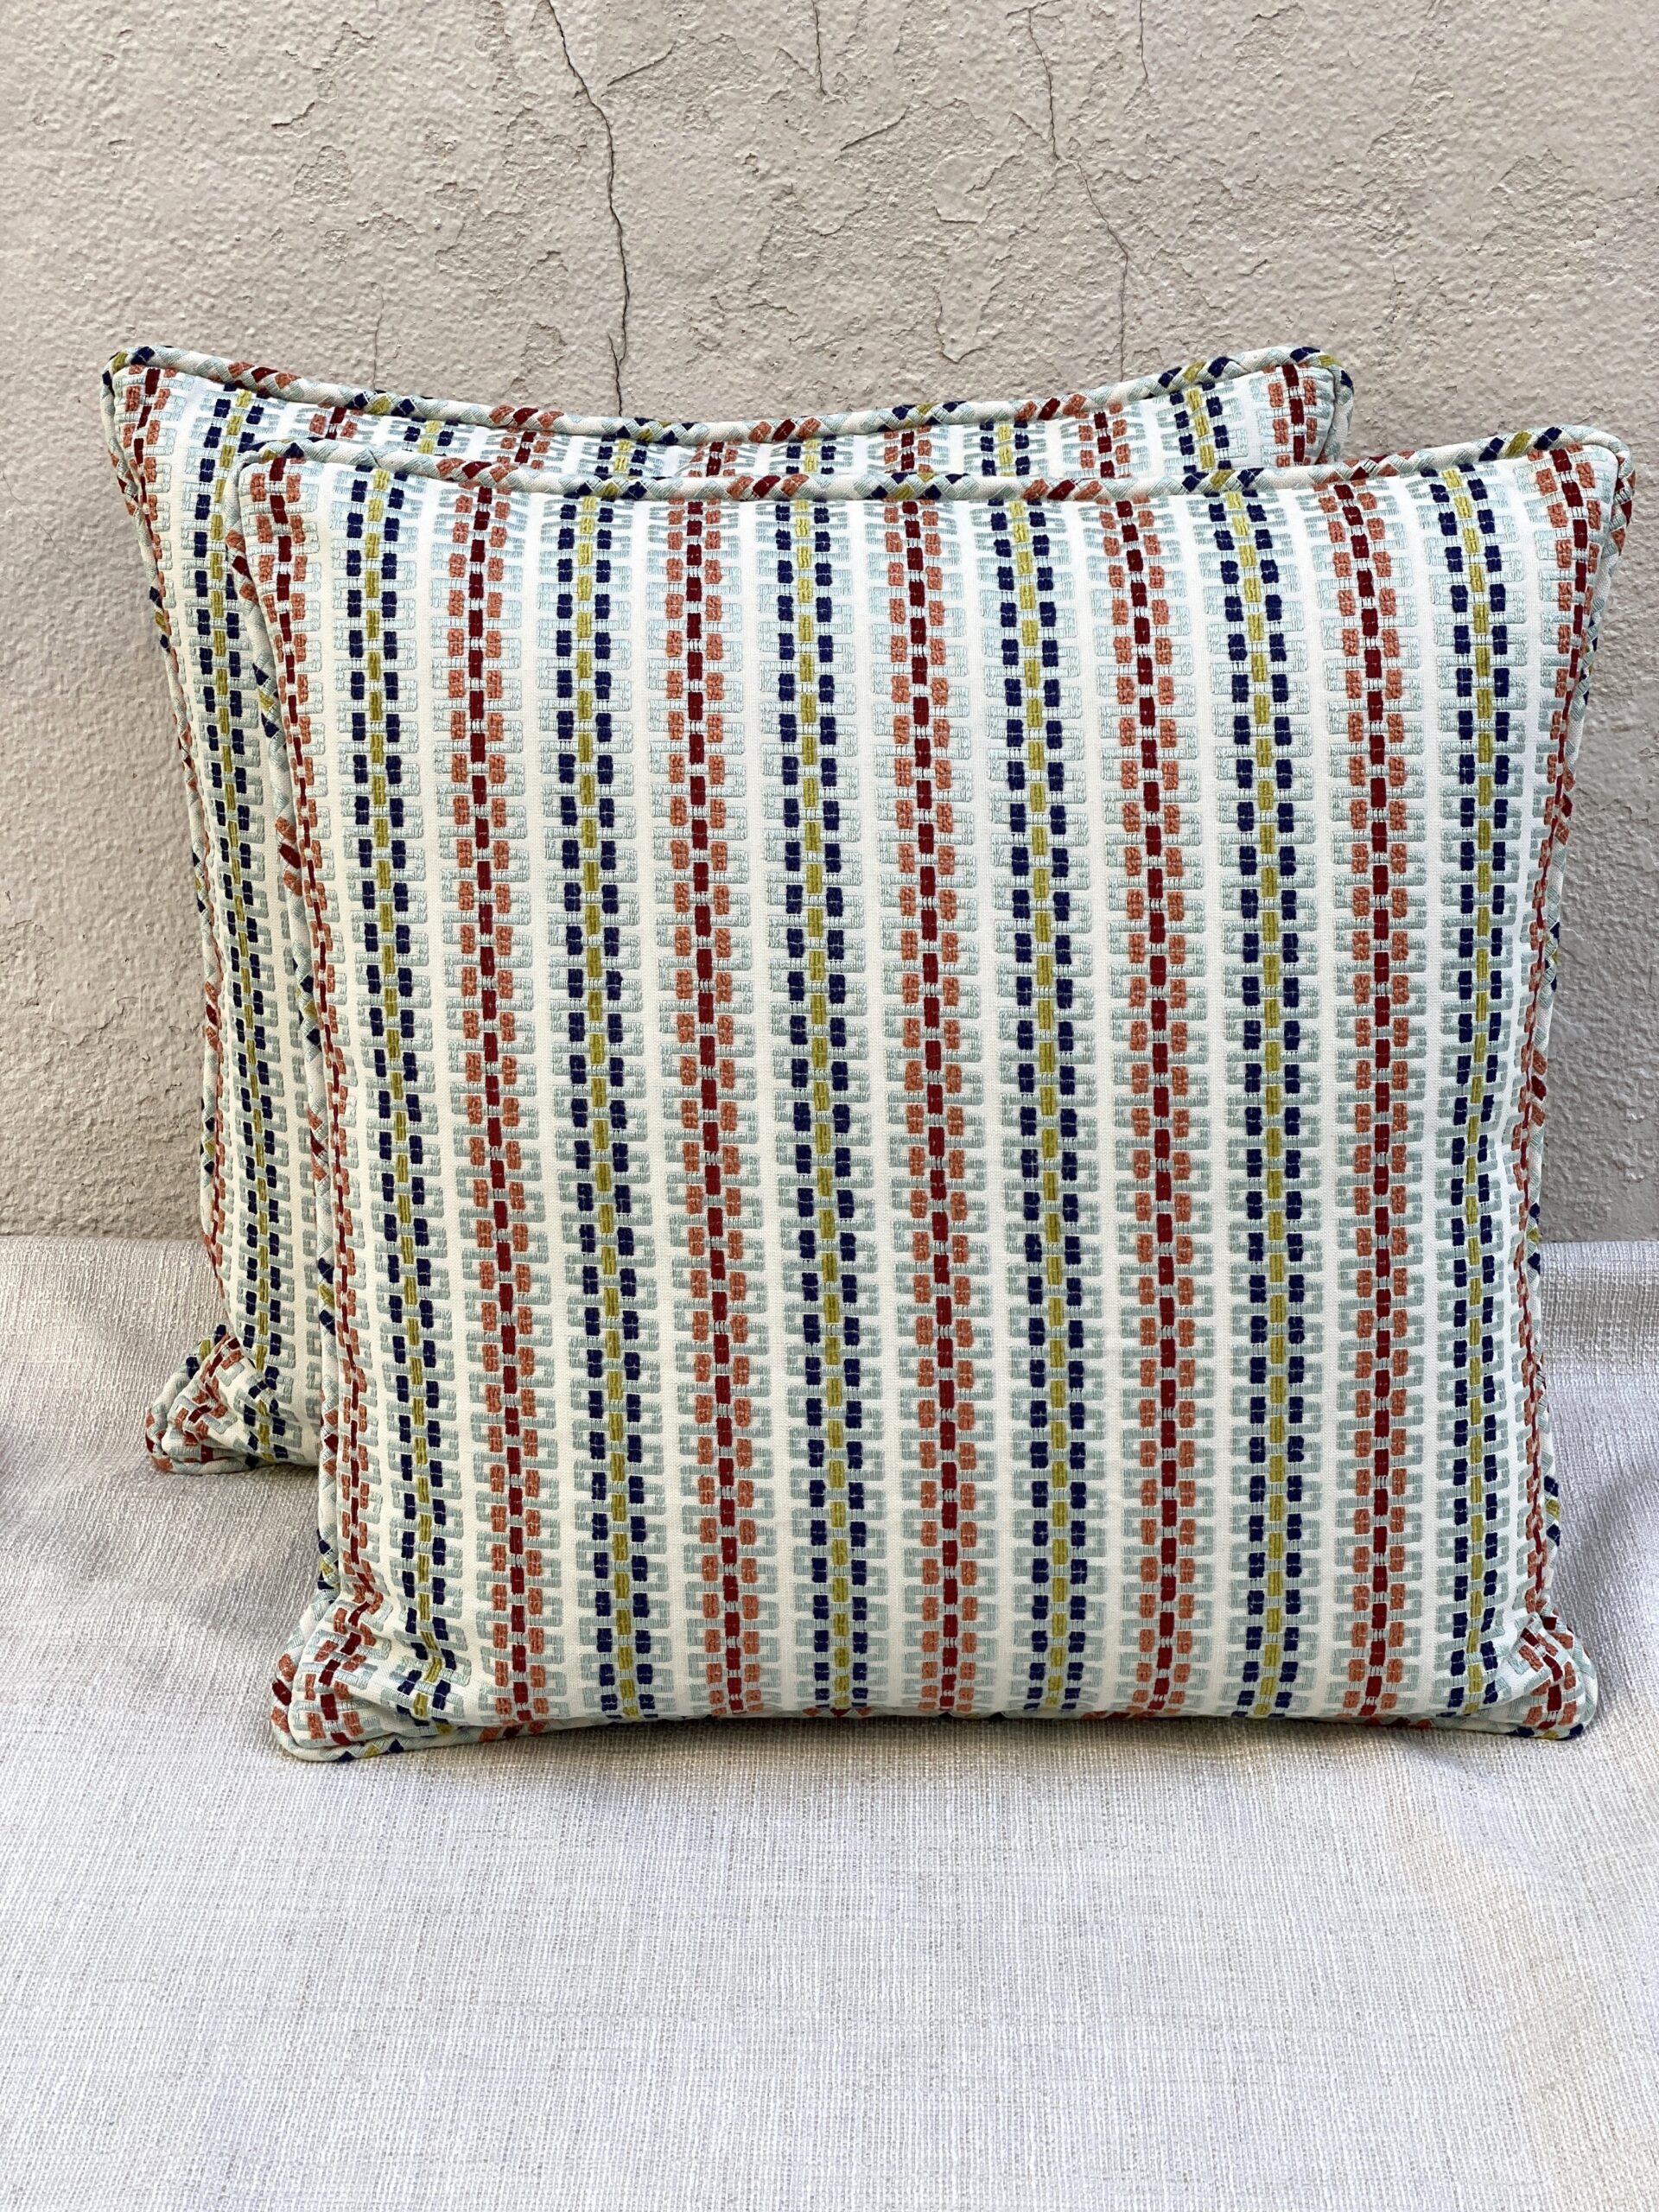 Wesley Hall Stentson Pillows